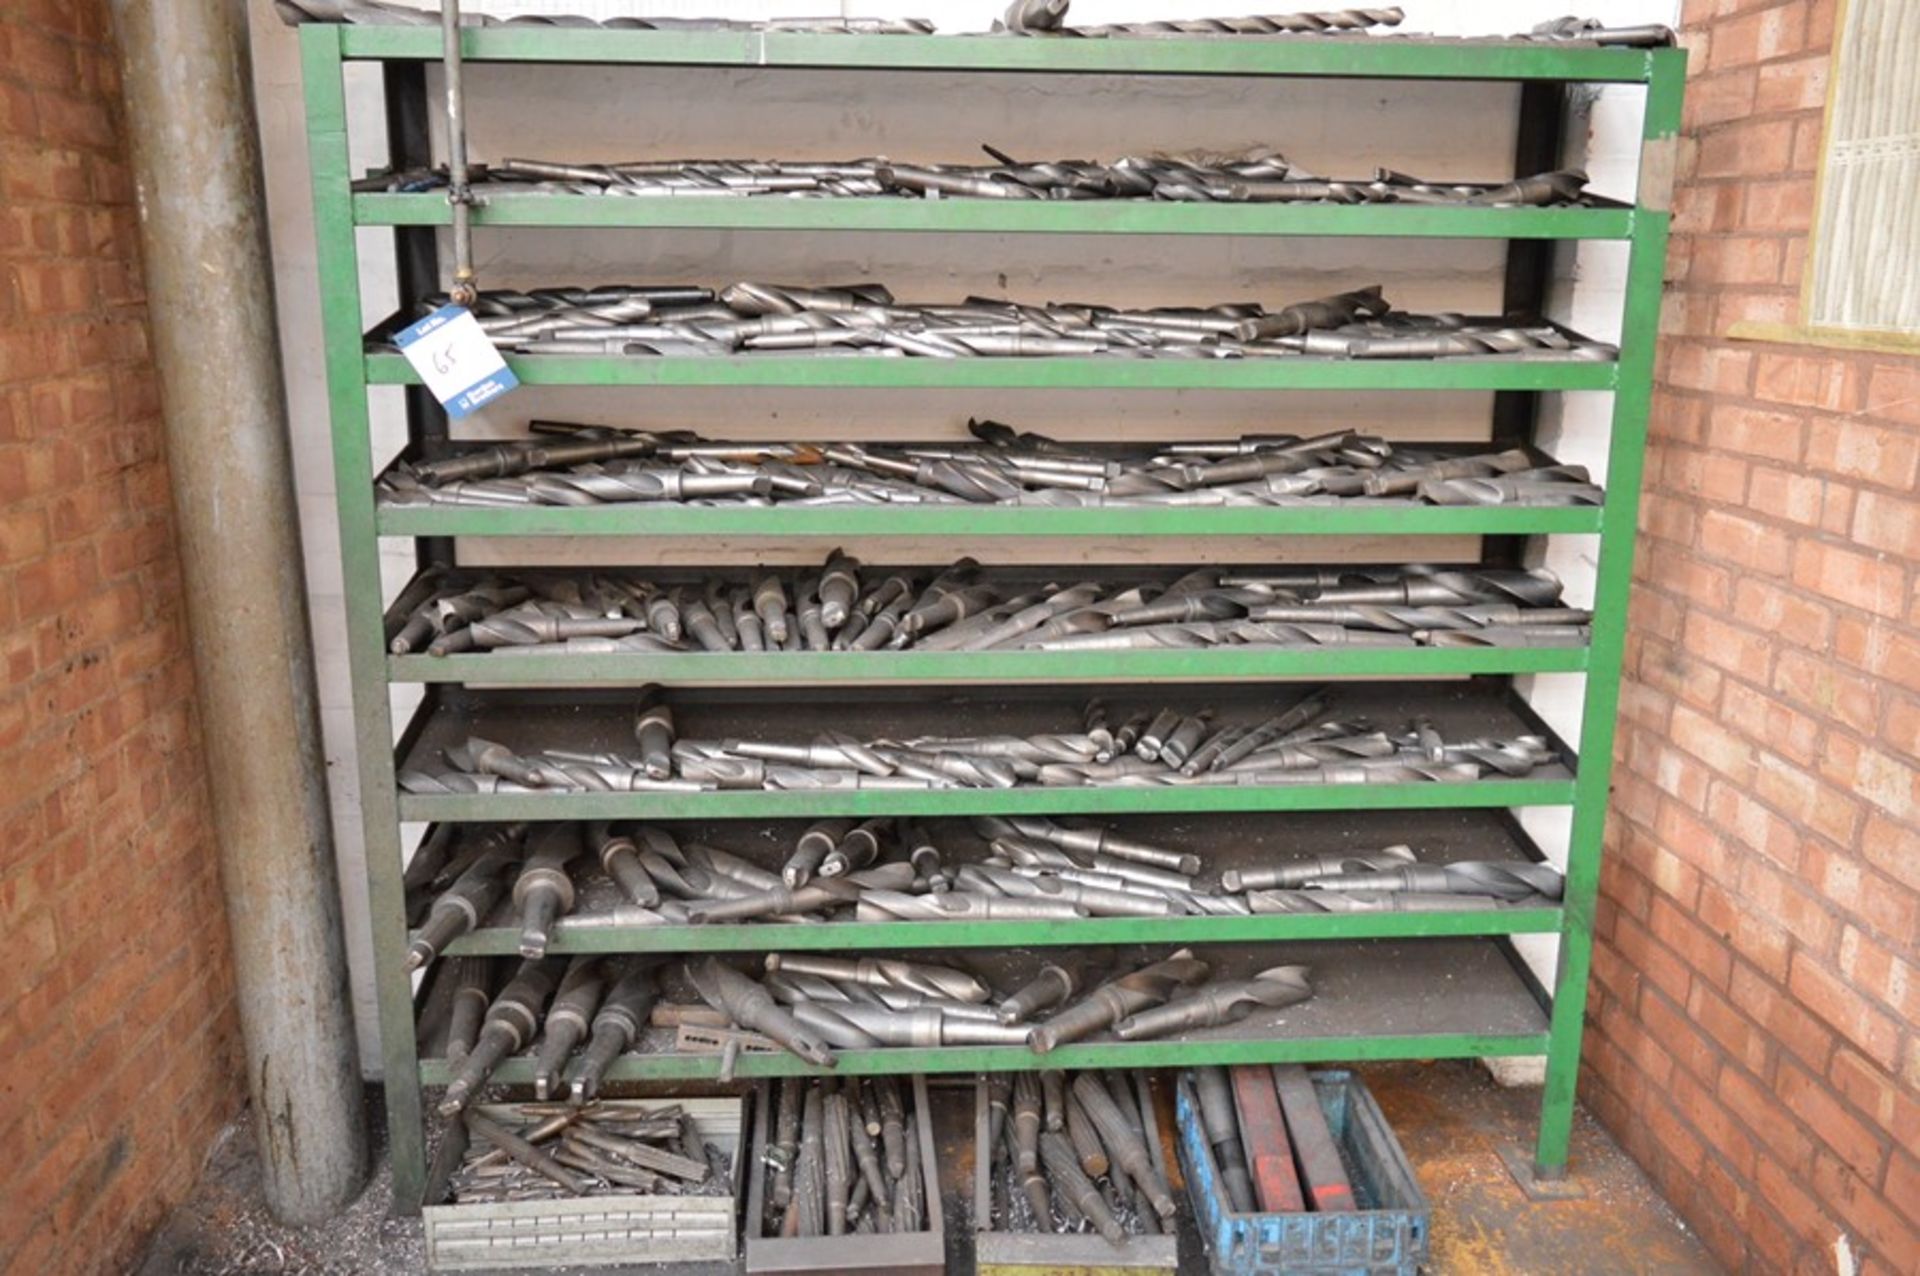 8 Tier shelf and contents to include large quantity of taper shank drill bits, various sizes, as